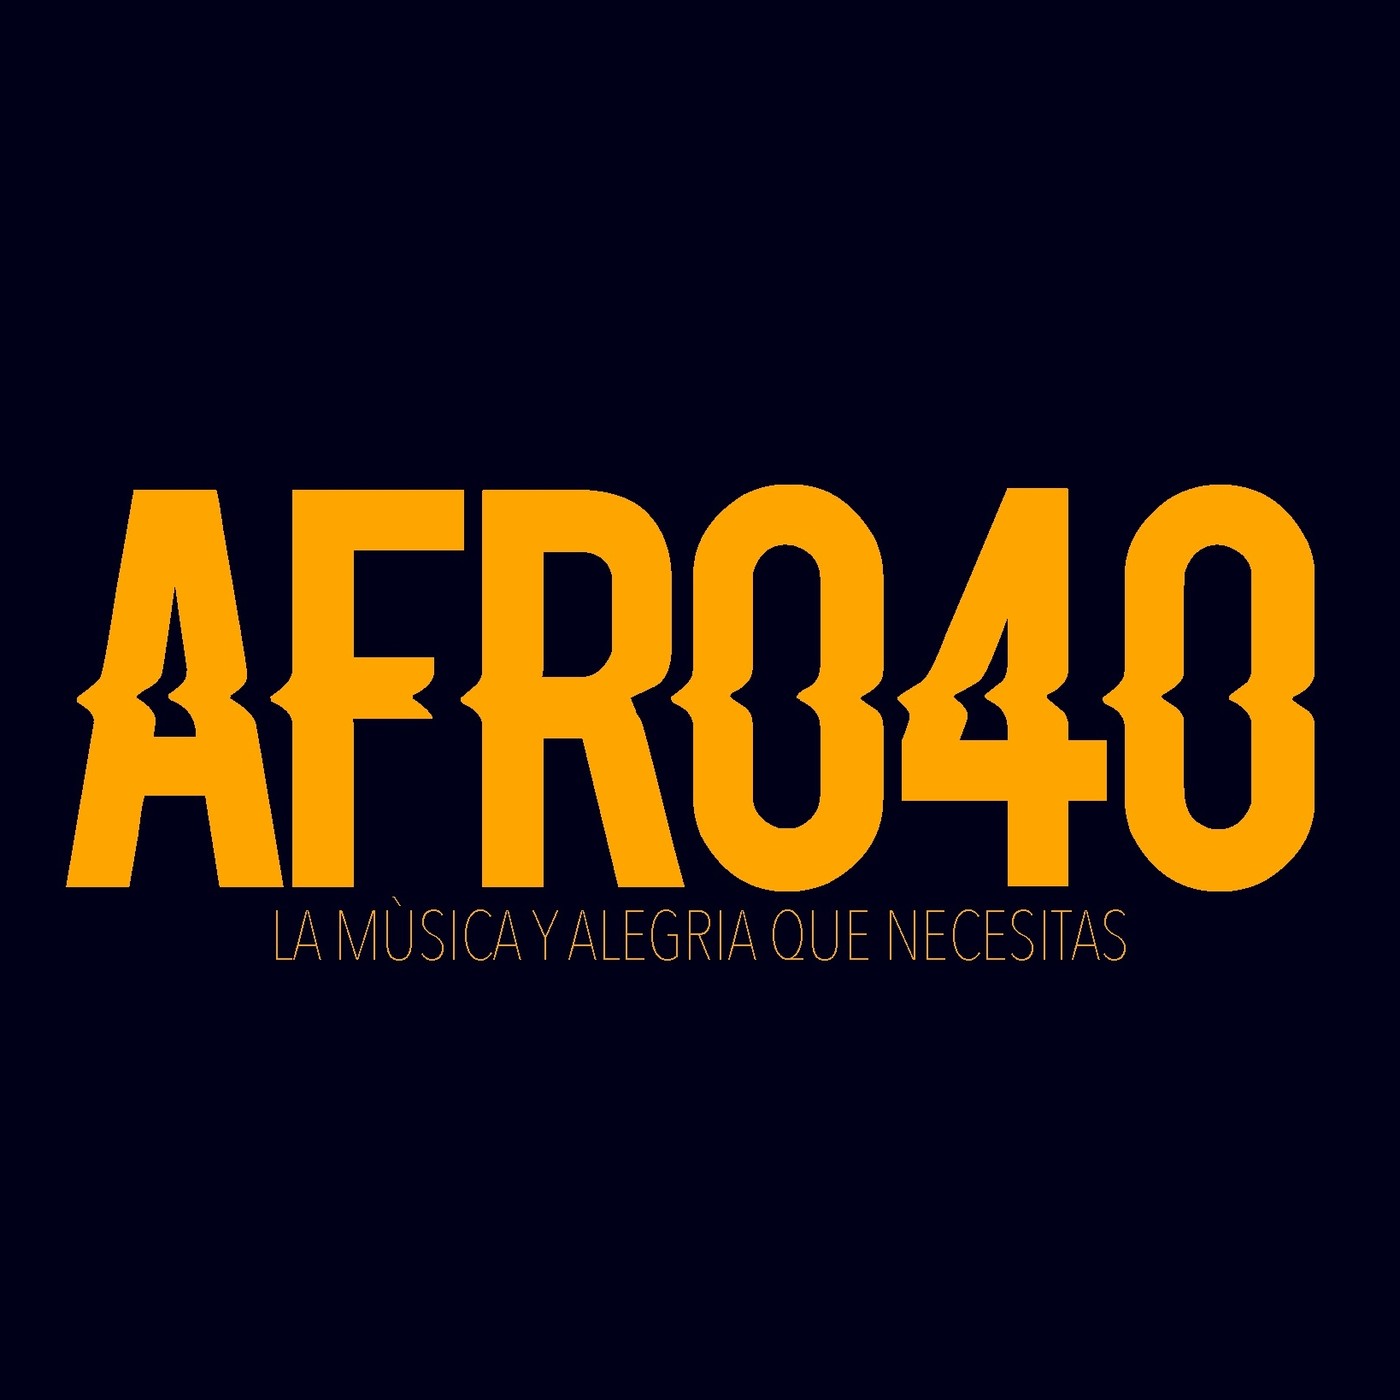 AFRO40